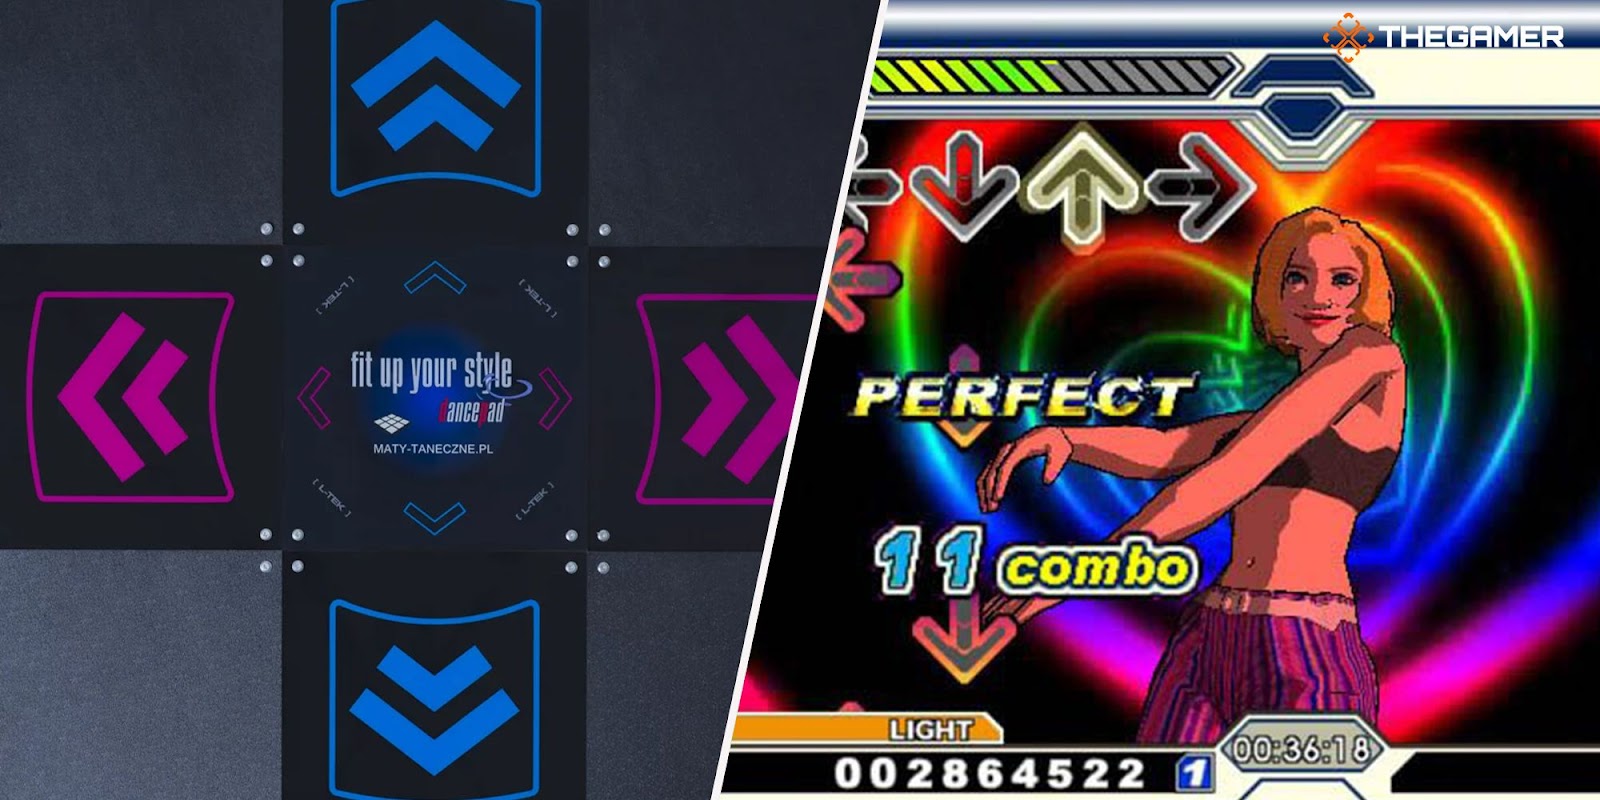 [Panel 1] An L-Tek EX Pro Metal Dance Pad controller. [Panel 2] Lady dancing in front of a colorful heart background in Dance Dance Revolution: Ultramix